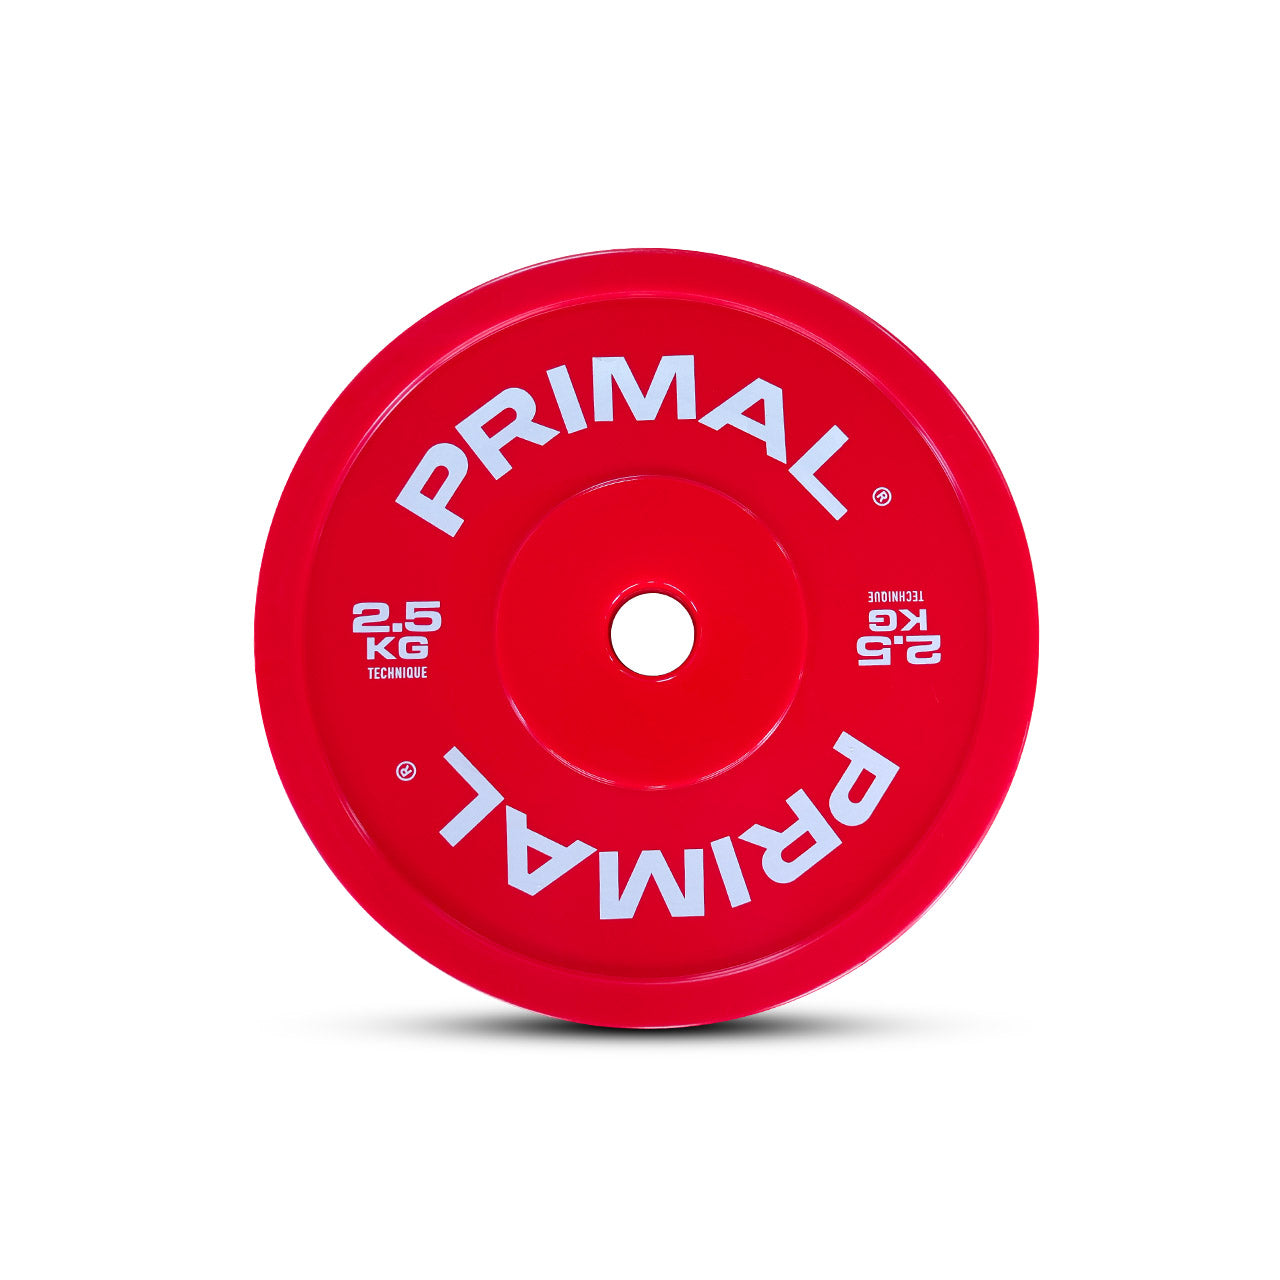 Primal Performance Series Technique Weight Plate - 2.5kg